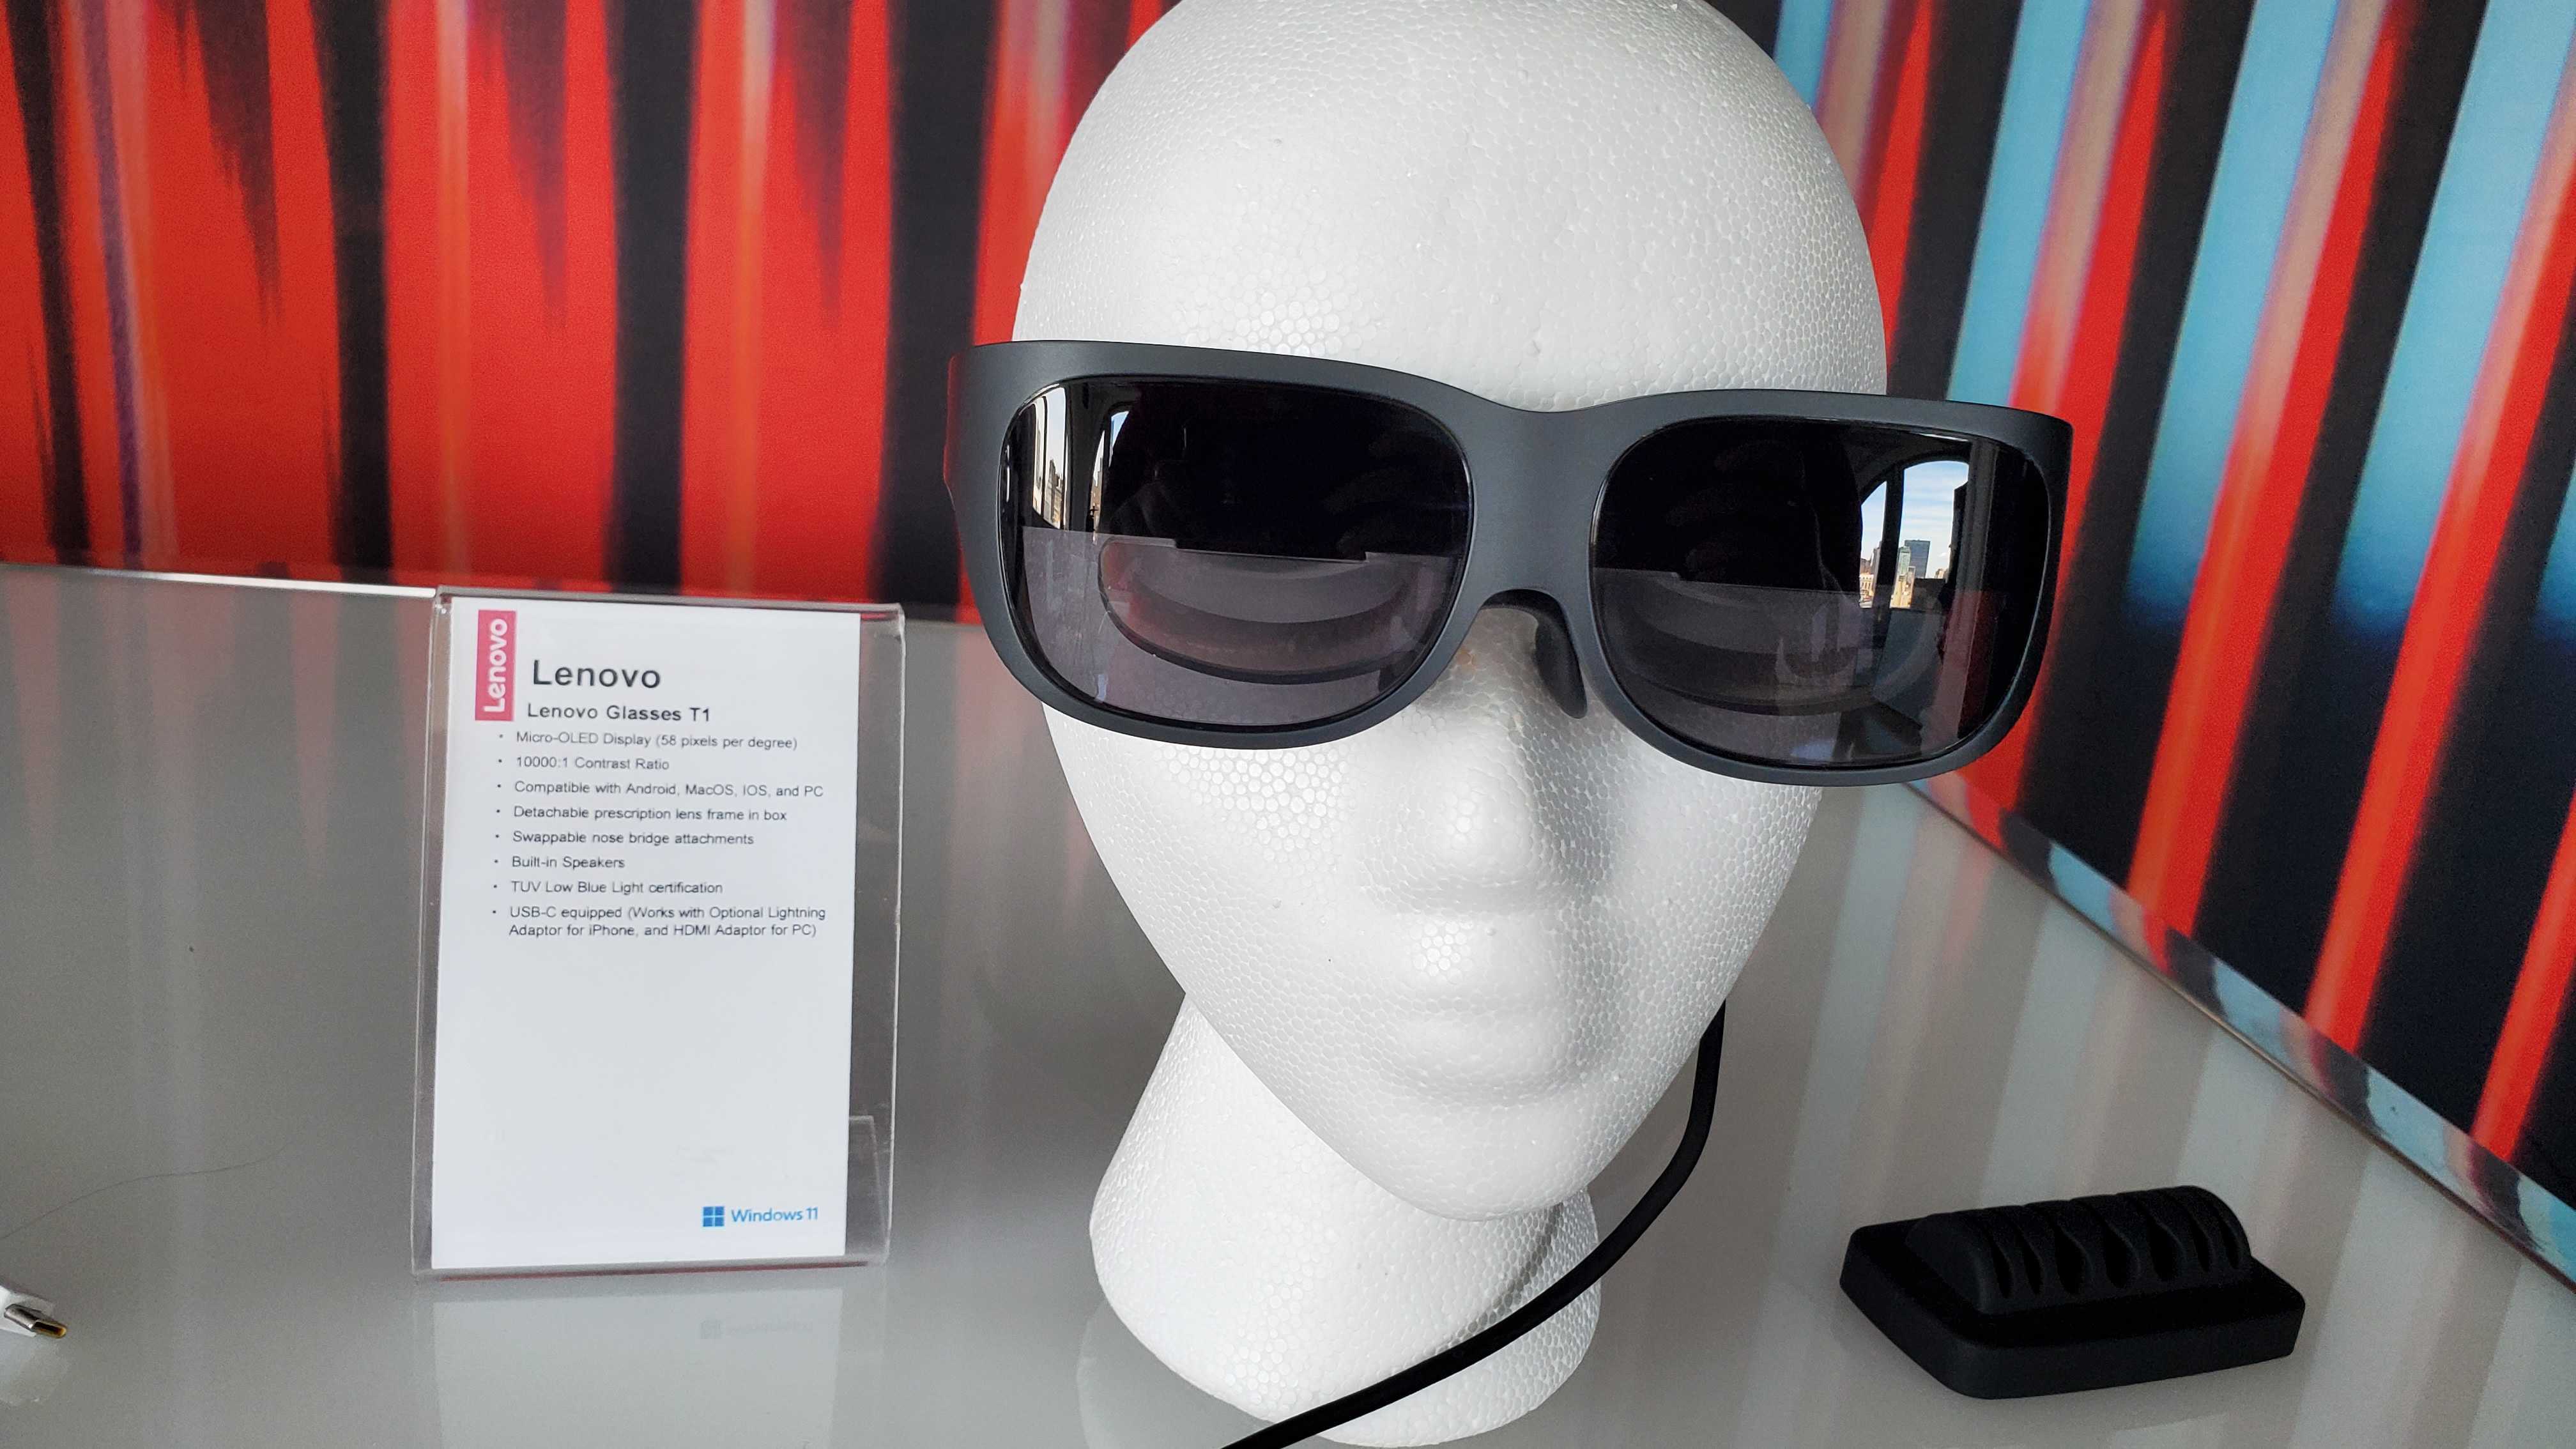 AR glasses propped up on mannequin head